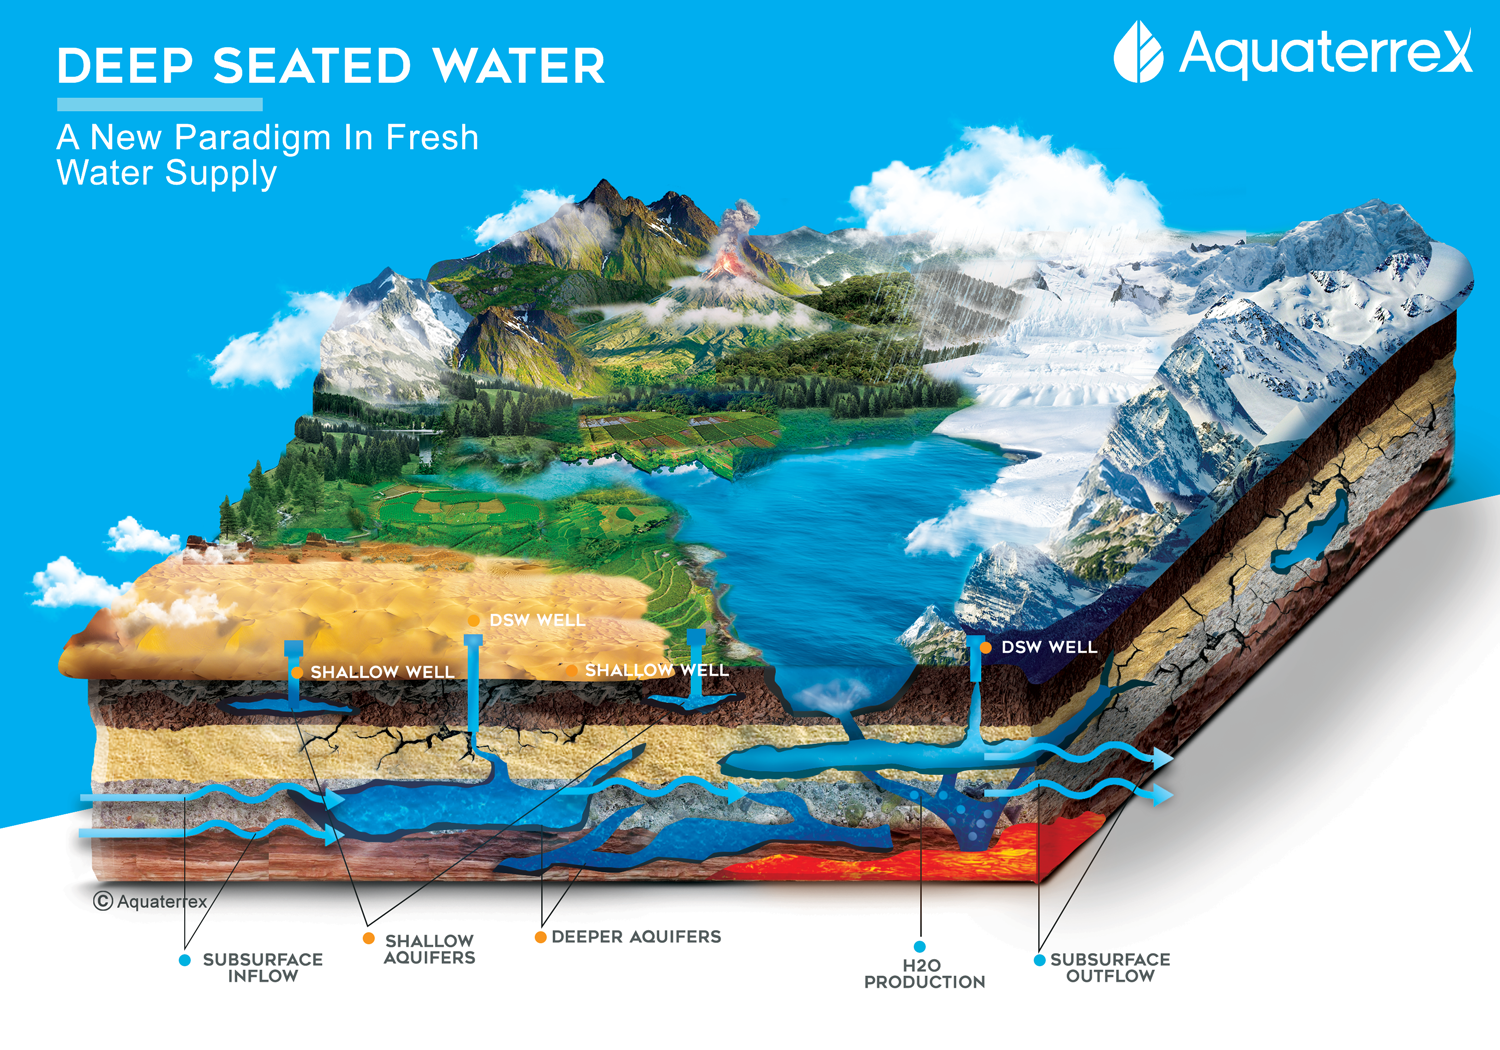 DSW Water Illustration Depiction of shallow and deeper aquifers